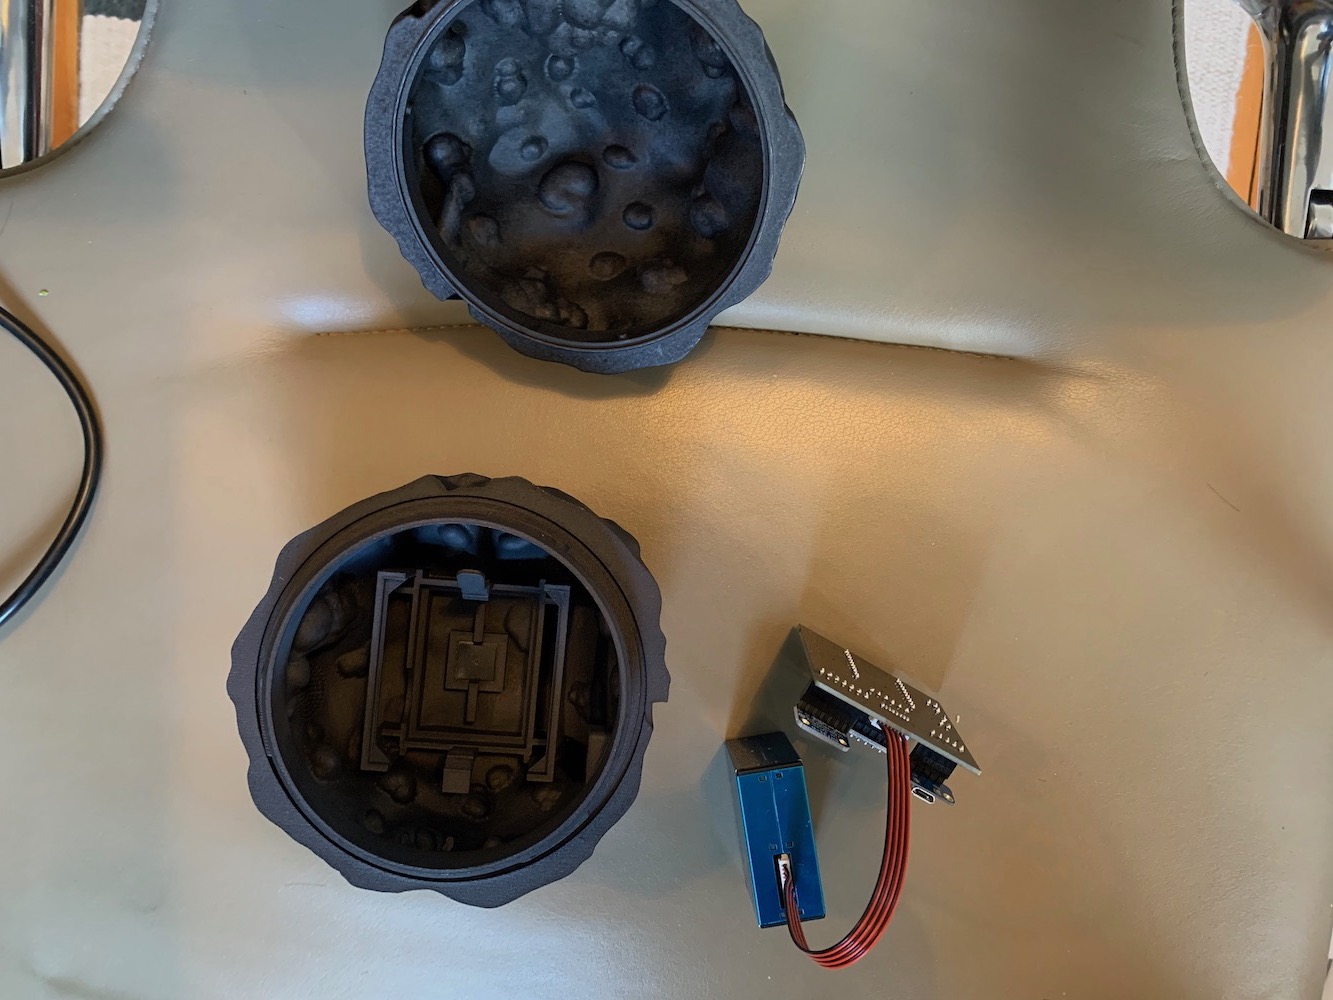 Image showing the top and bottom half of the diesel char Dustbox 2.0 sensor and completed PCB with sensor attached beside it